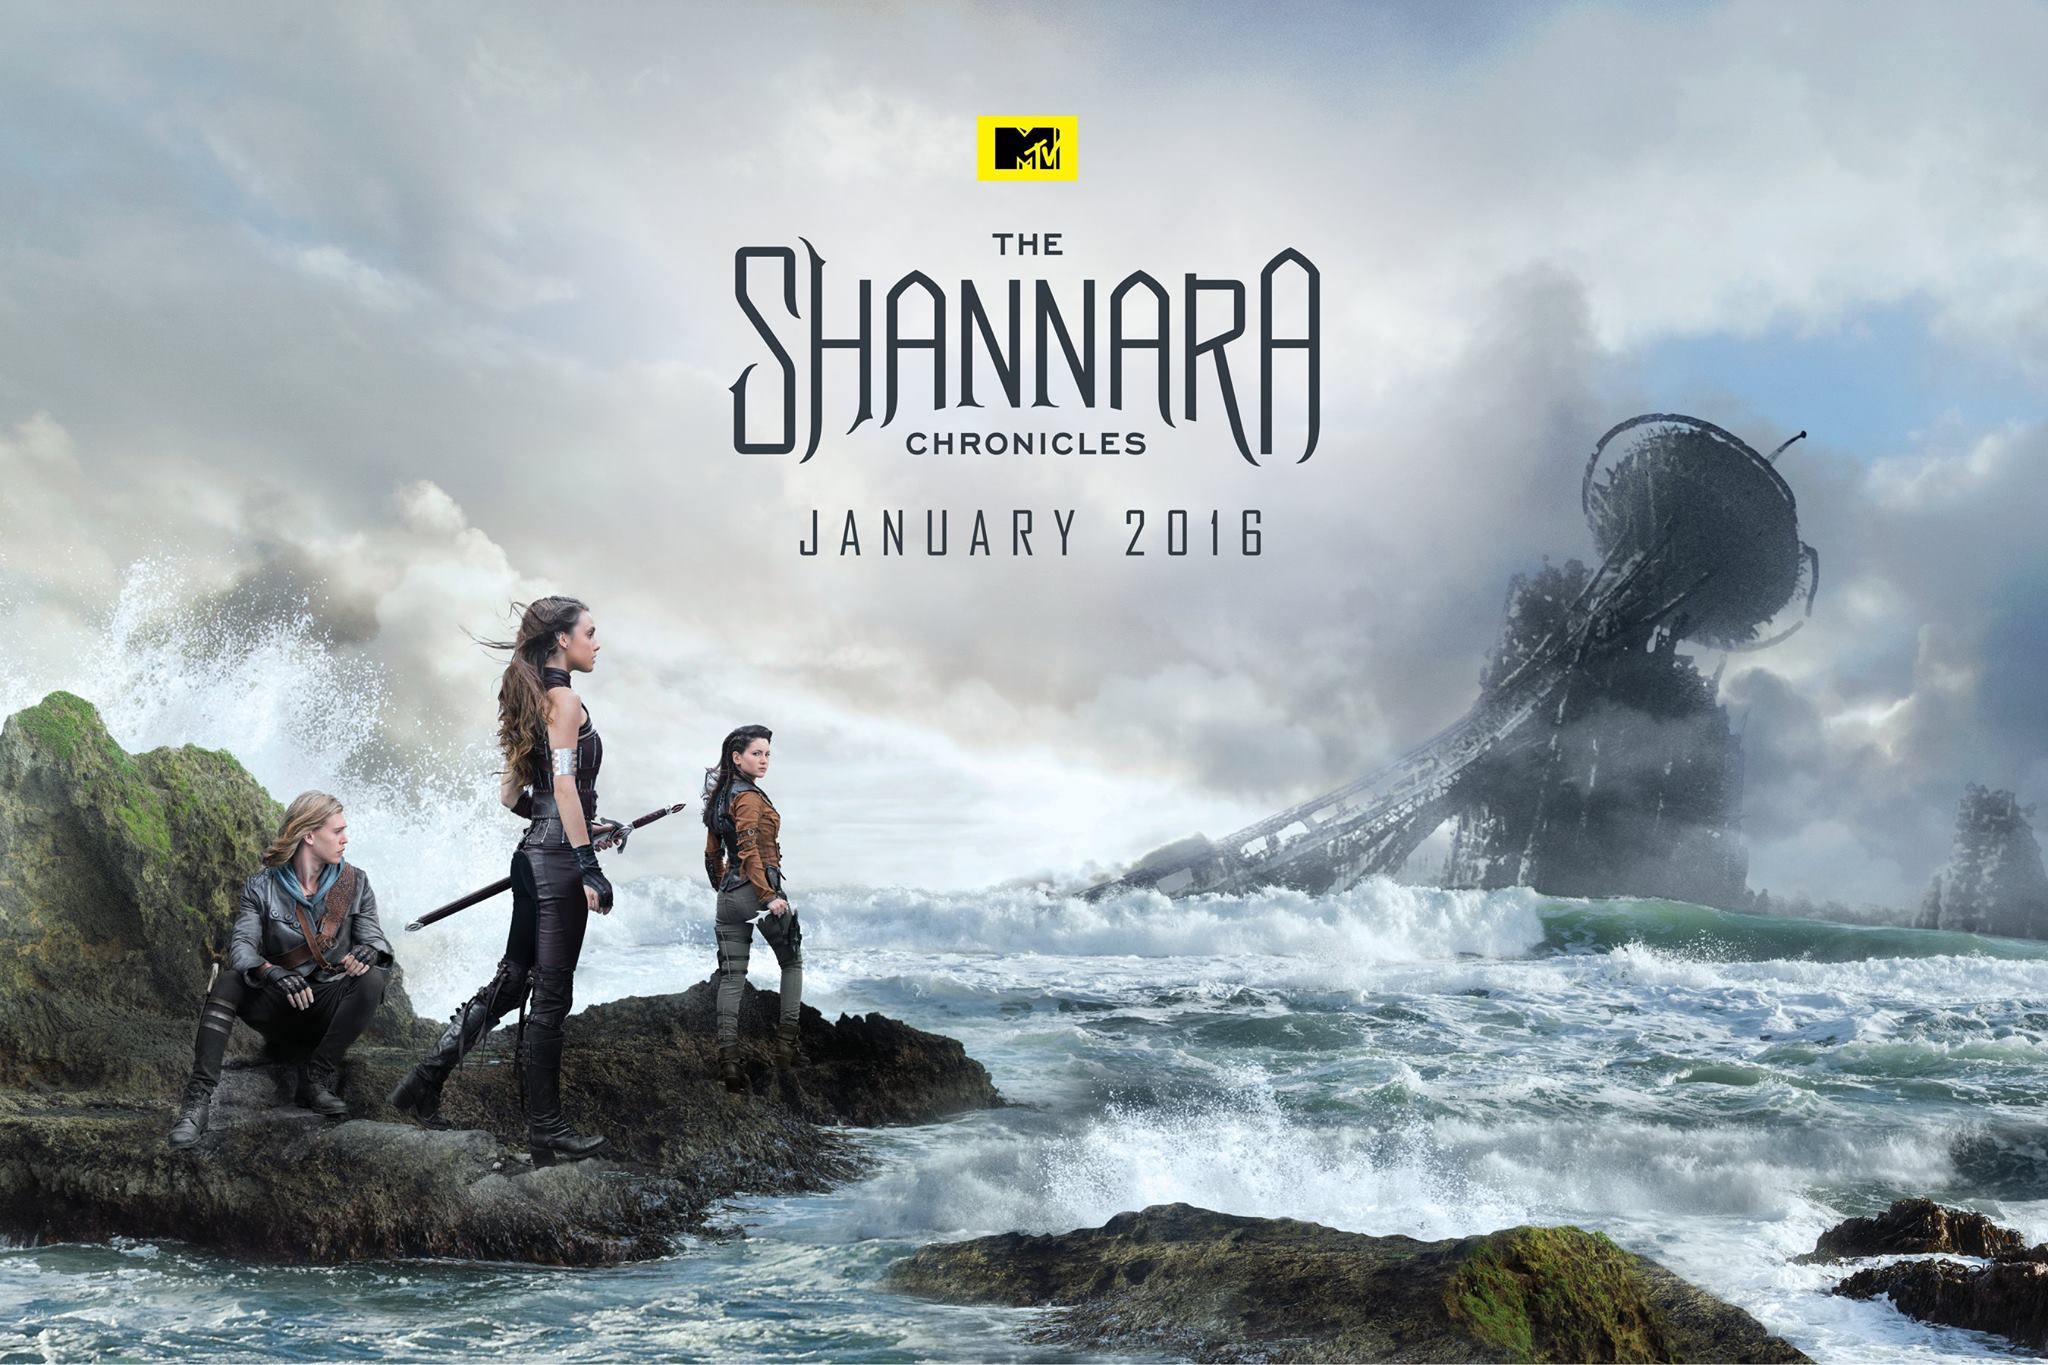 ‘The Shannara Chronicles’ Series Premiere Review by Chloe James